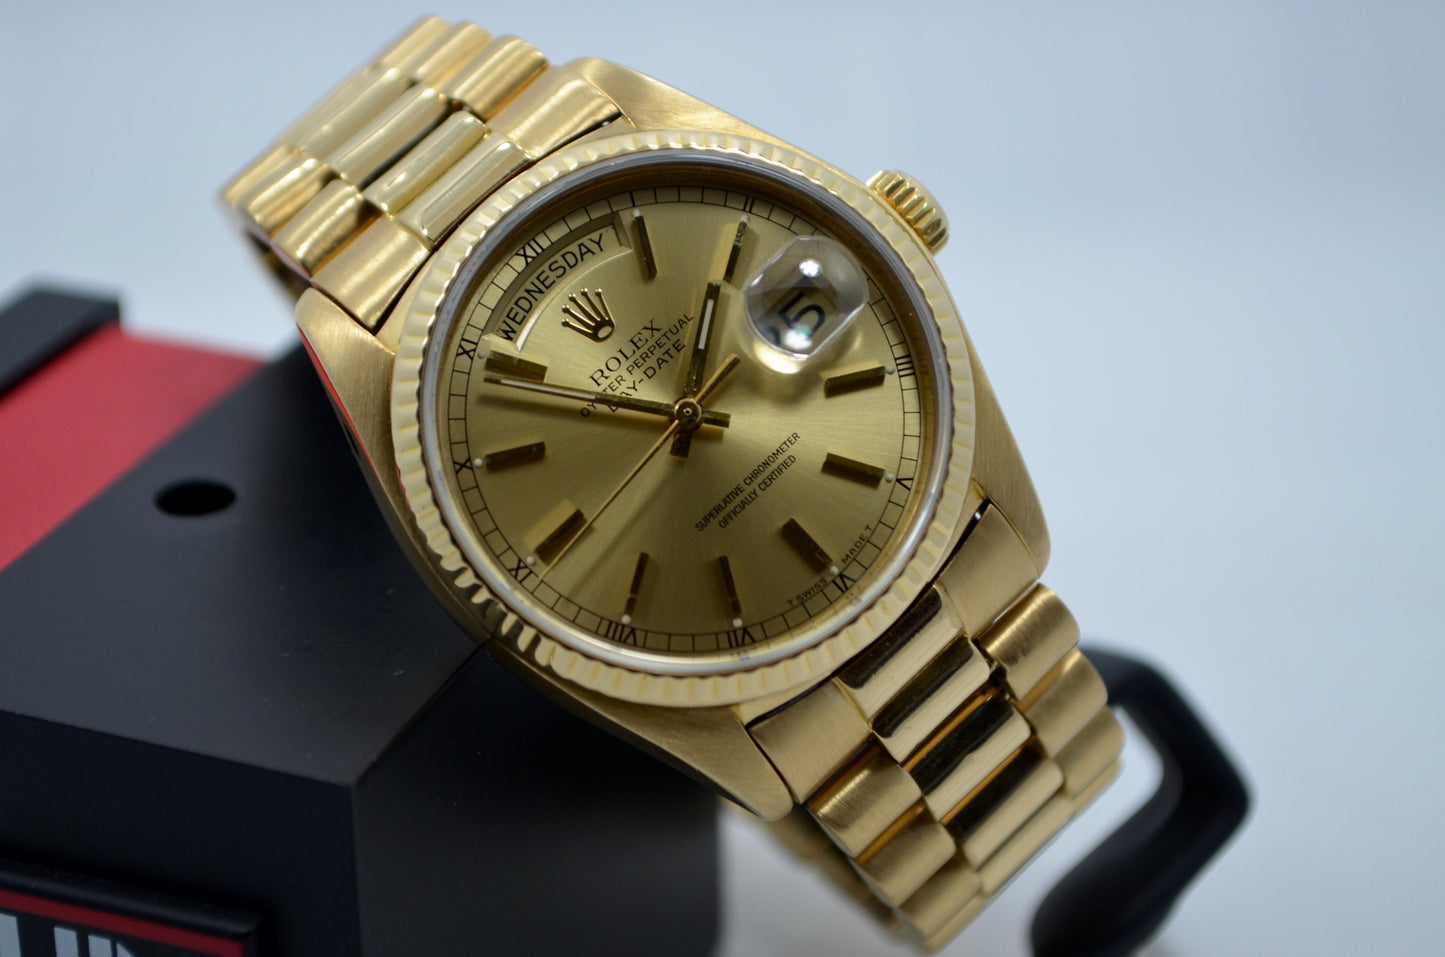 Vintage Rolex President Day Date 18038 18K Yellow Gold 1978 Wristwatch - Hashtag Watch Company